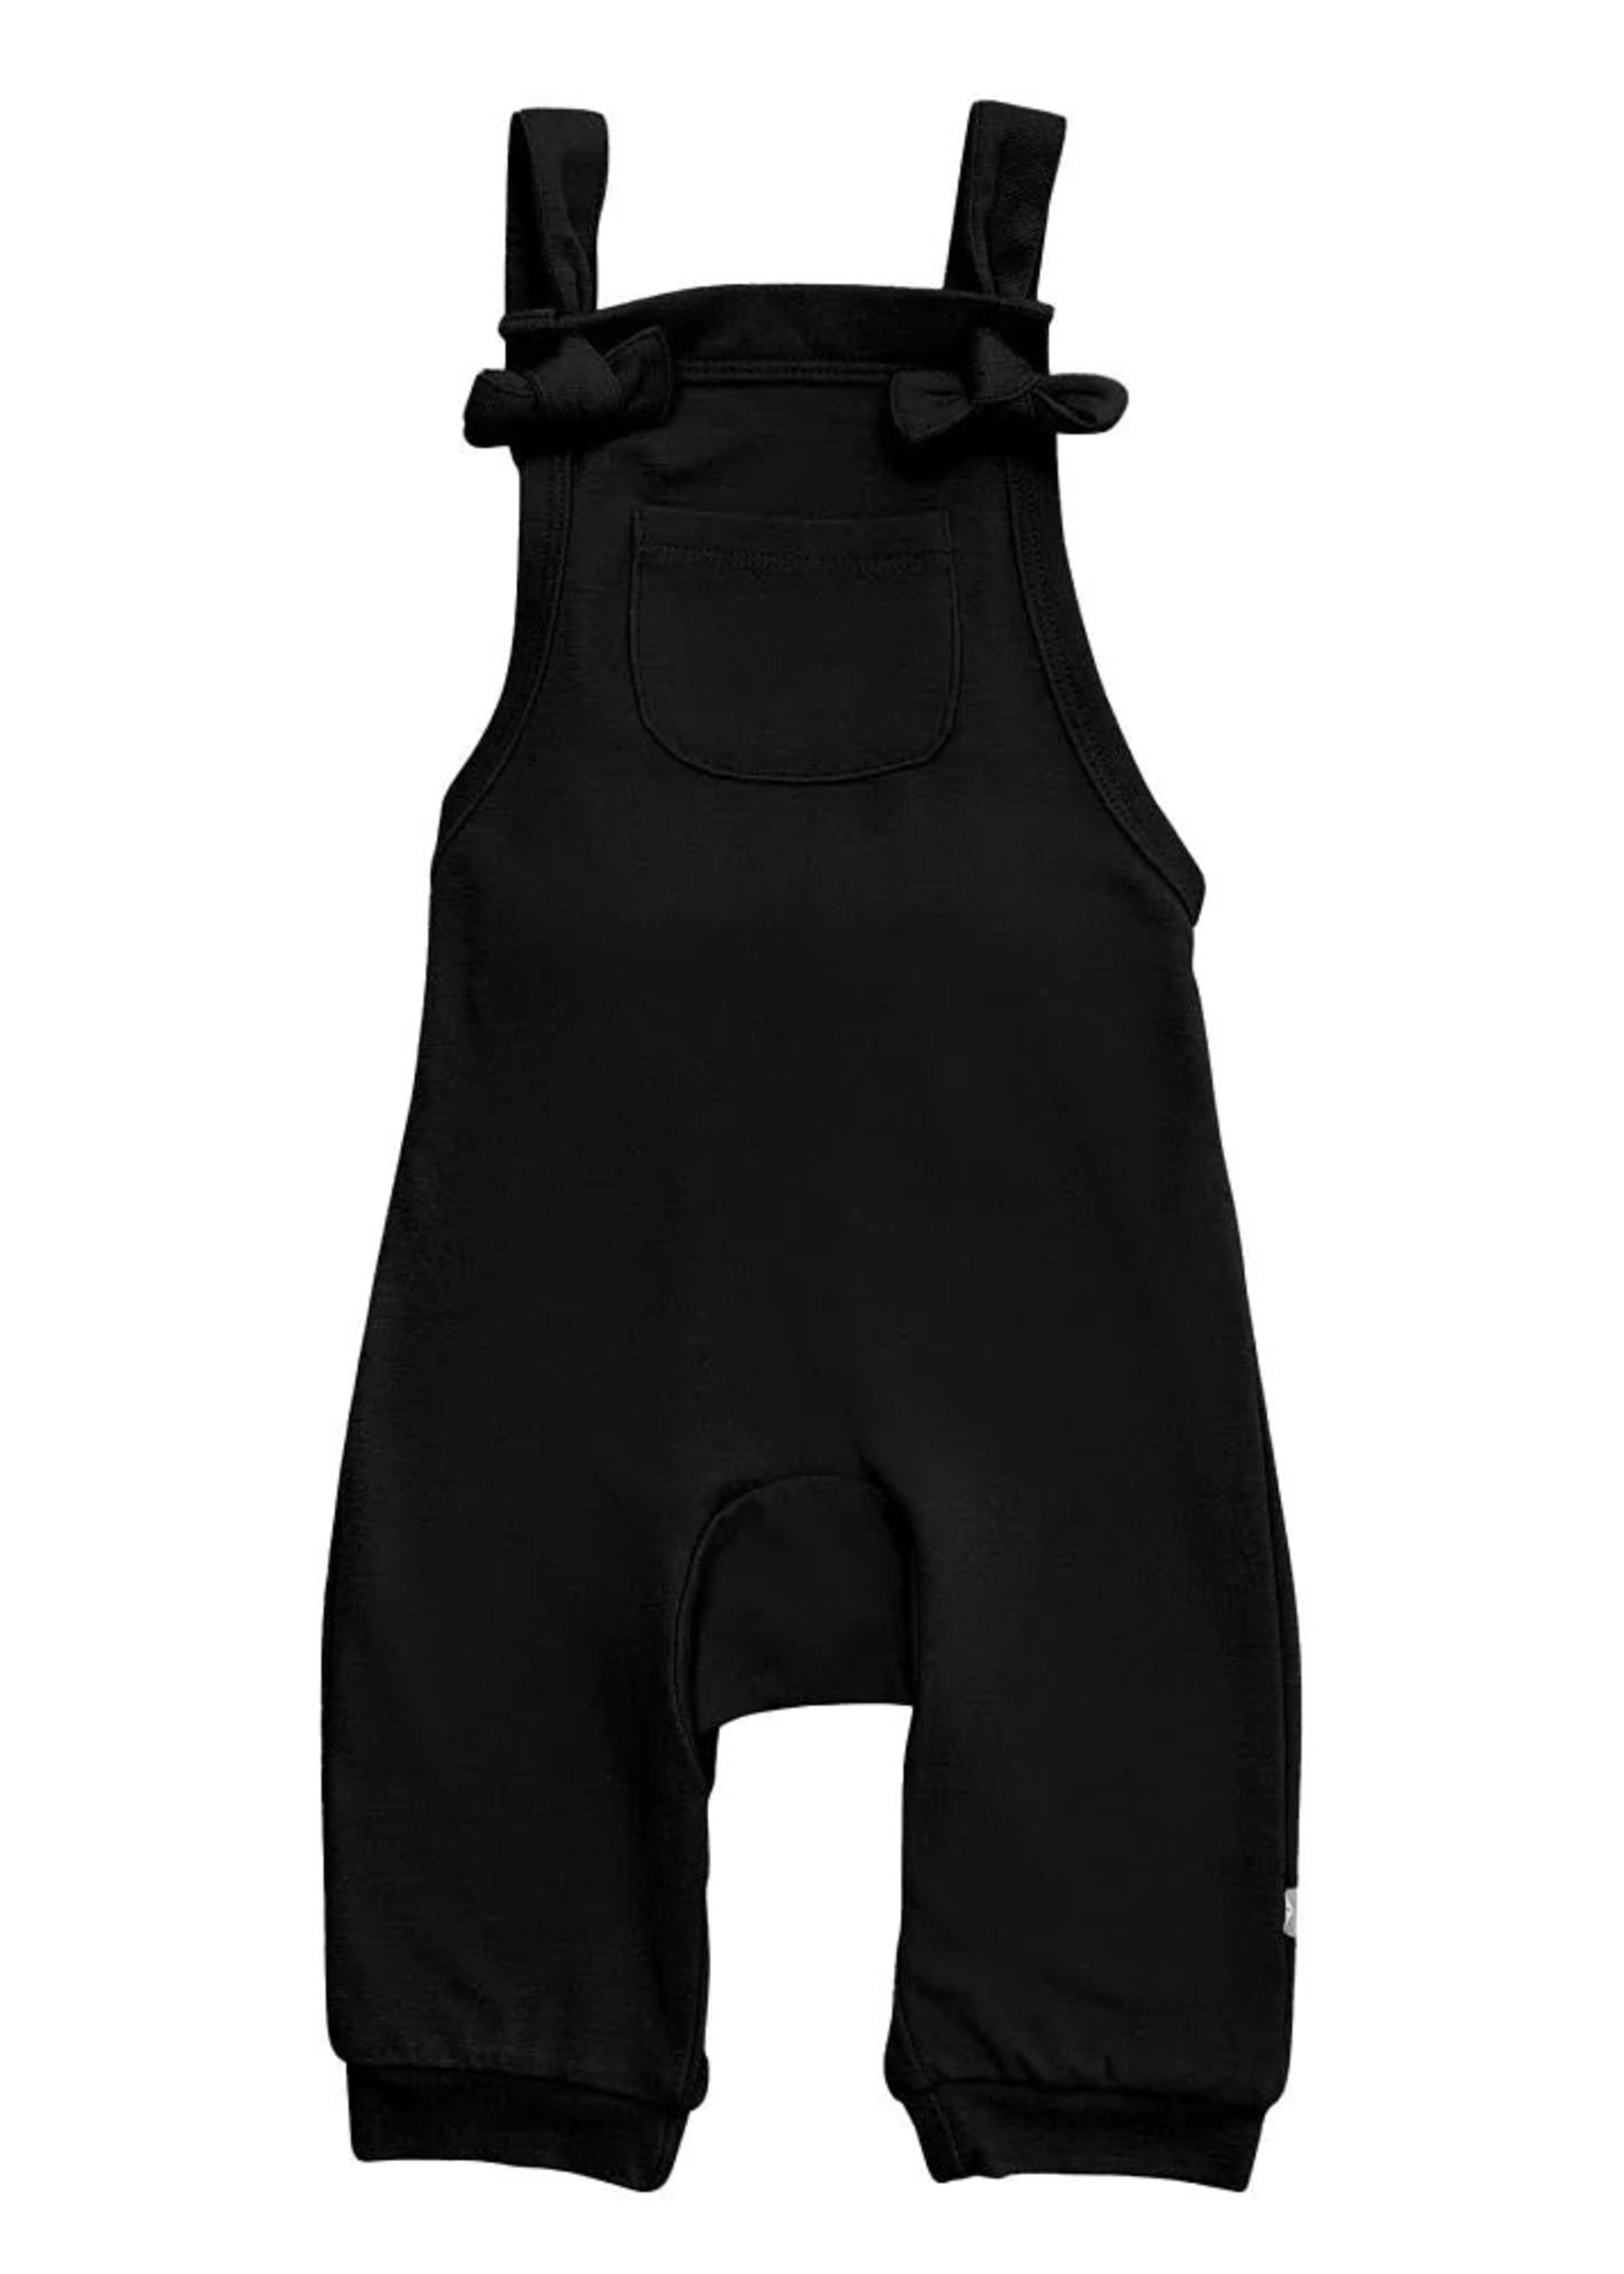 KYTE BABY Bamboo Jersey Overall